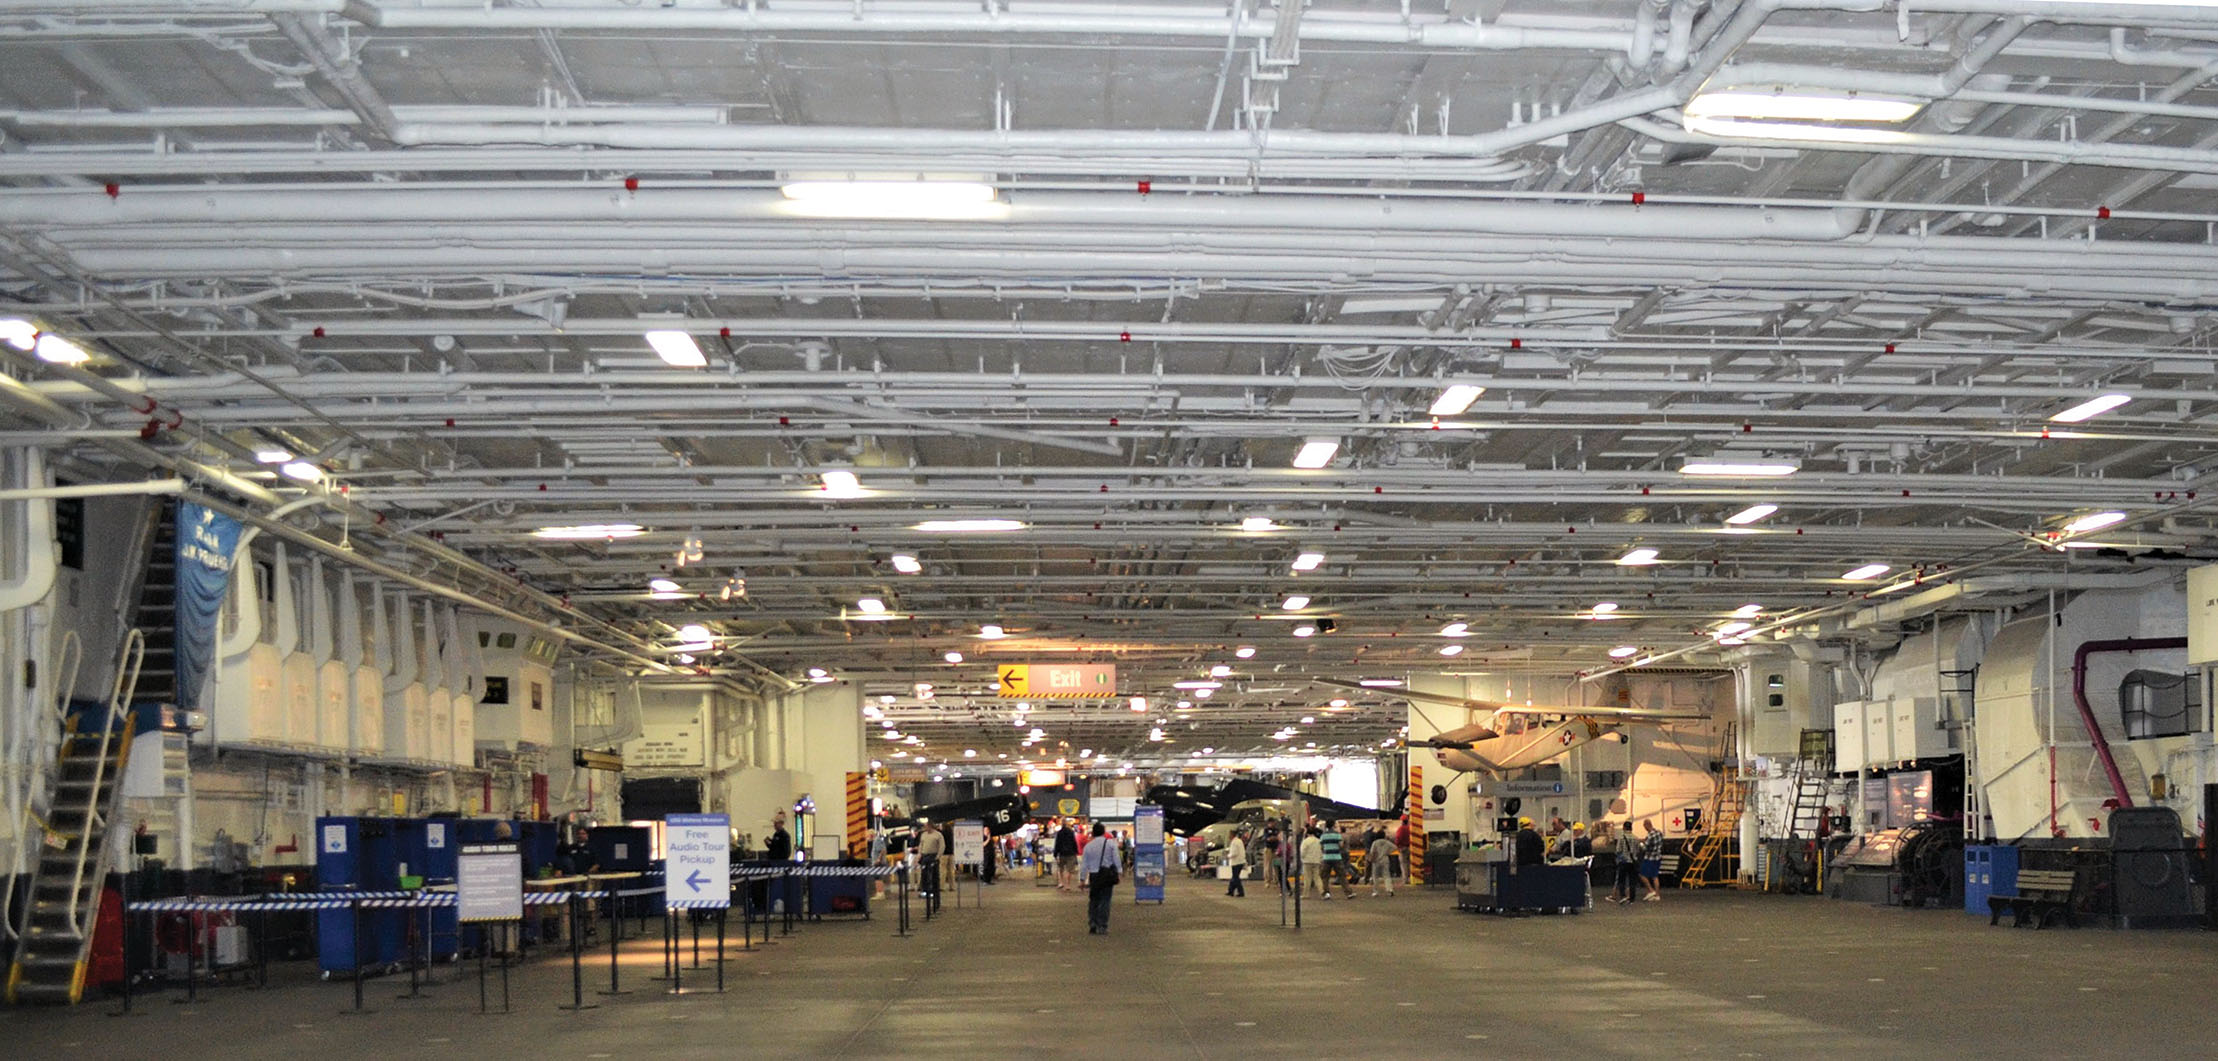 The Midway’s sprawling hangar deck is full of aircraft and other displays / Tom Edwards